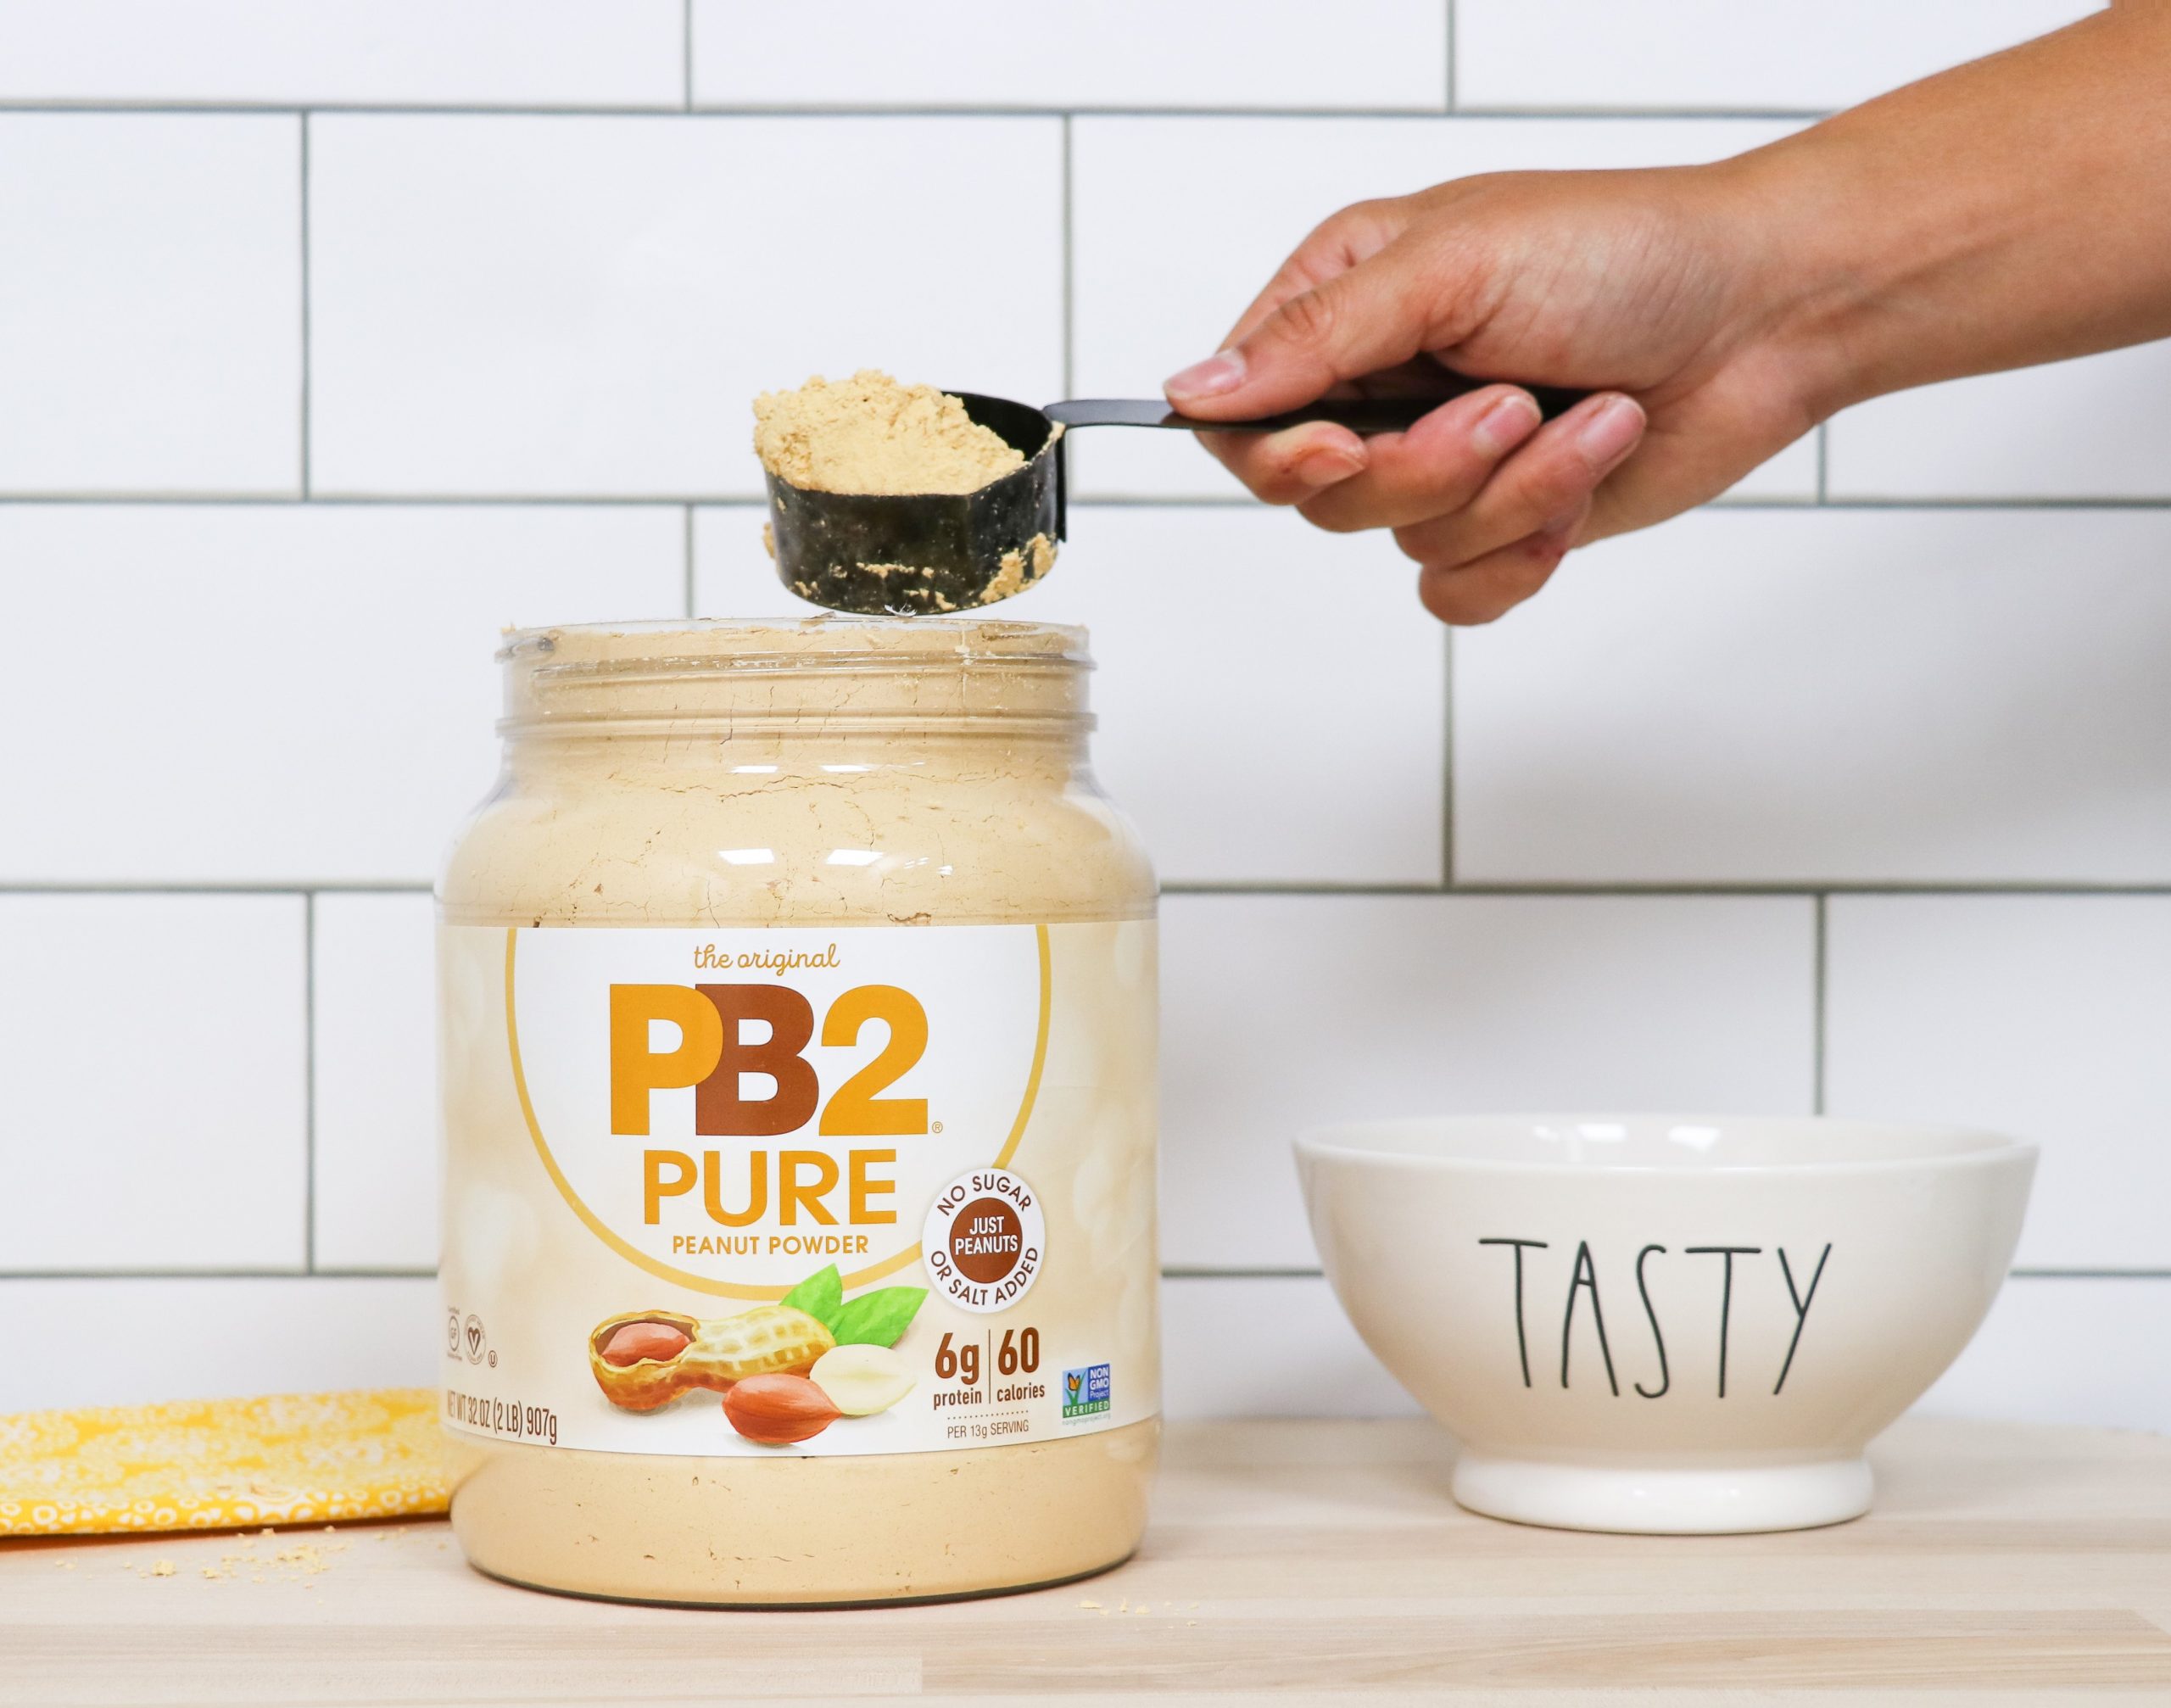 What is PB2 Pure?